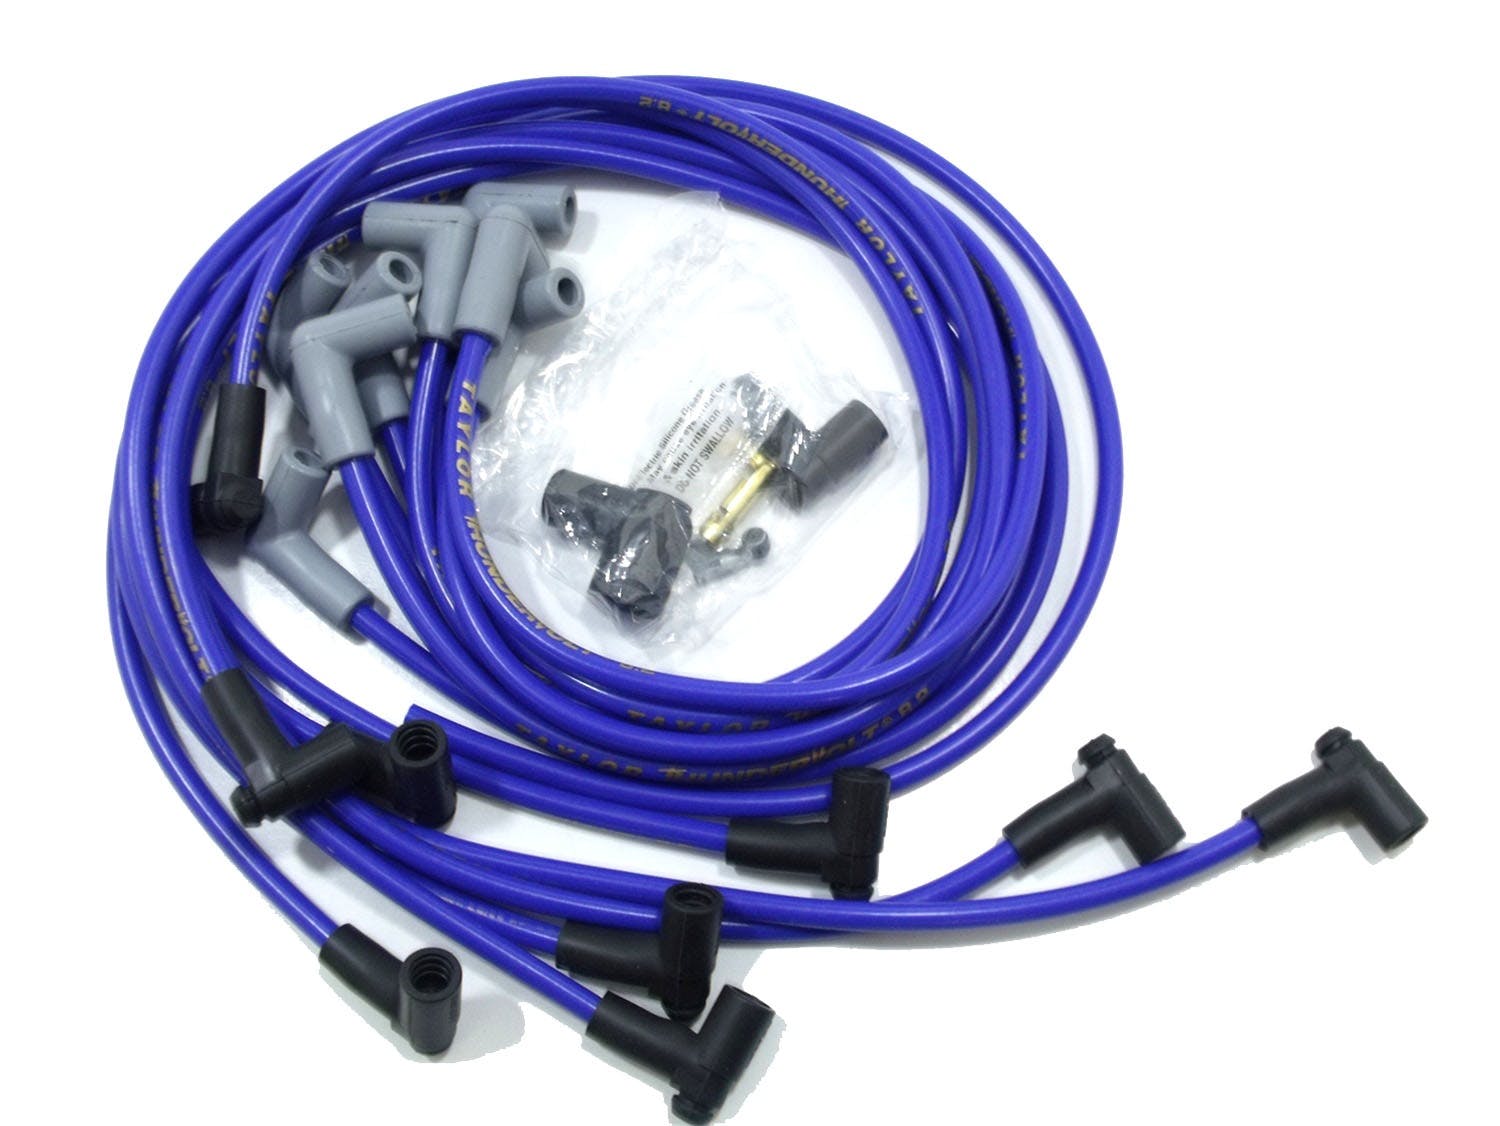 Taylor Cable Products 86602 Thundervolt 8.2 race fit 8 cyl blue